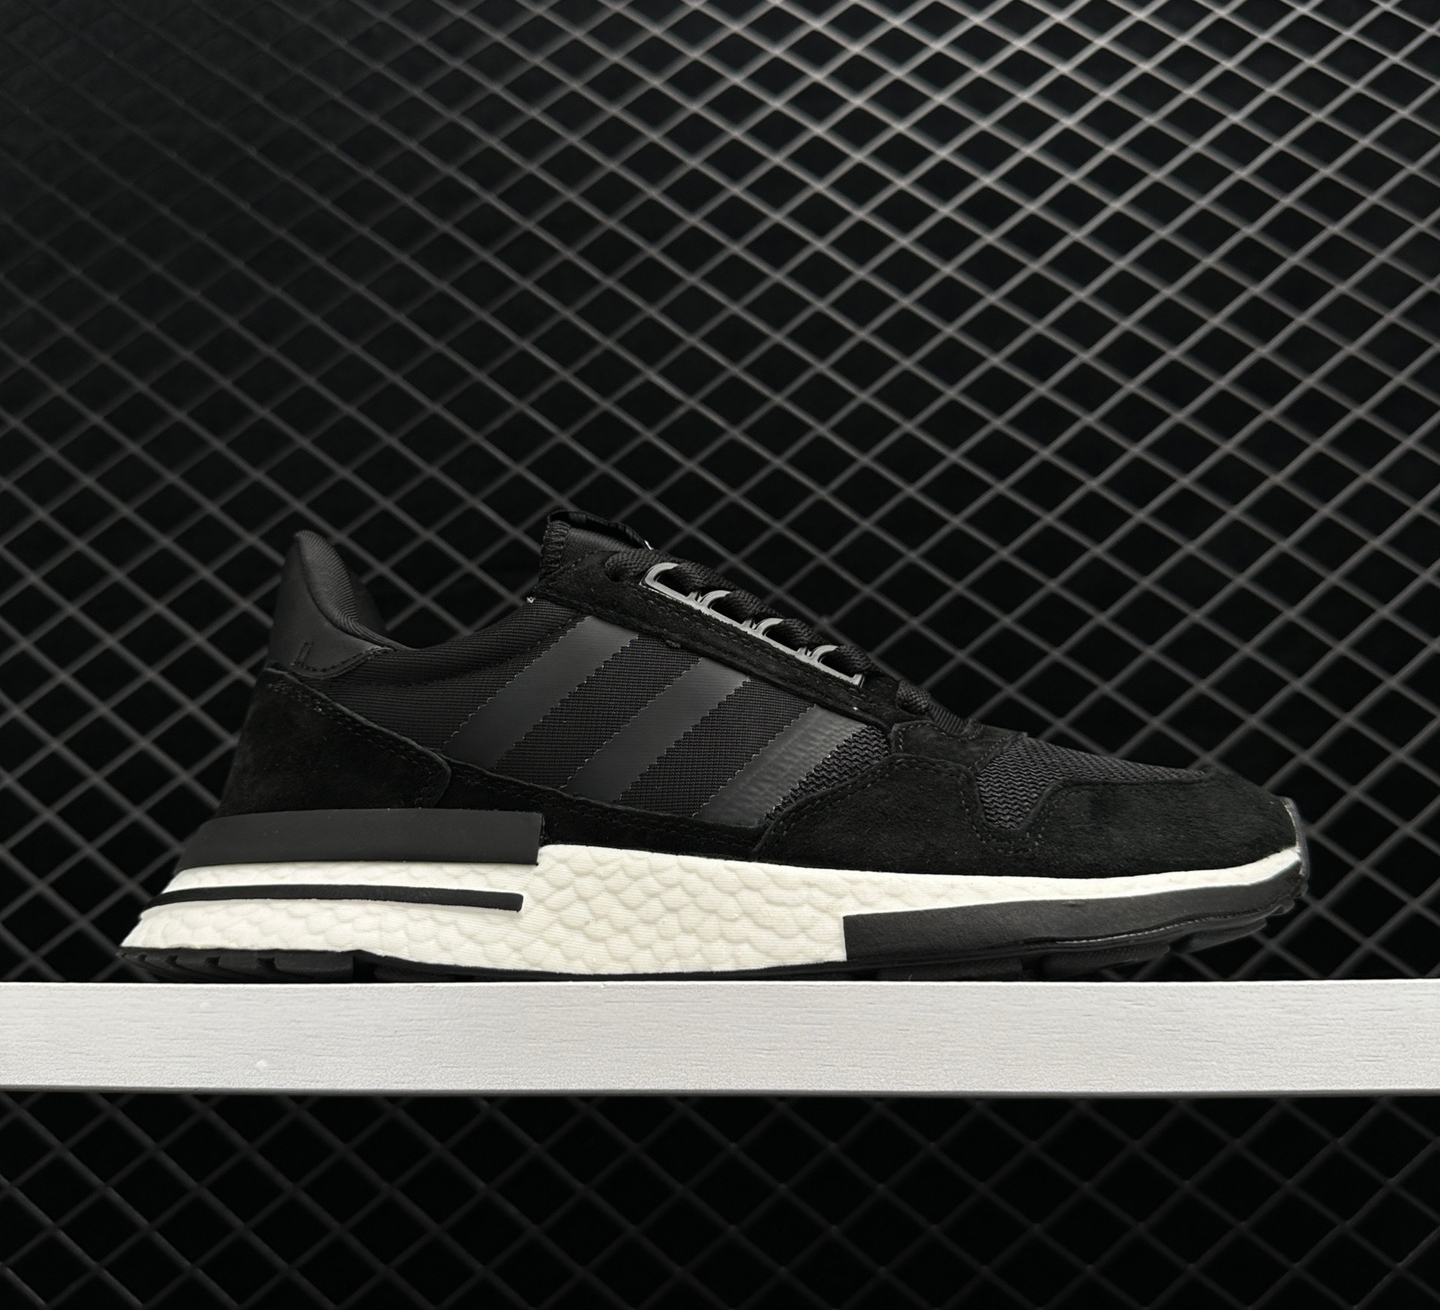 Adidas ZX 500 RM 'Core Black' B42227 - Stylish and Comfortable Footwear